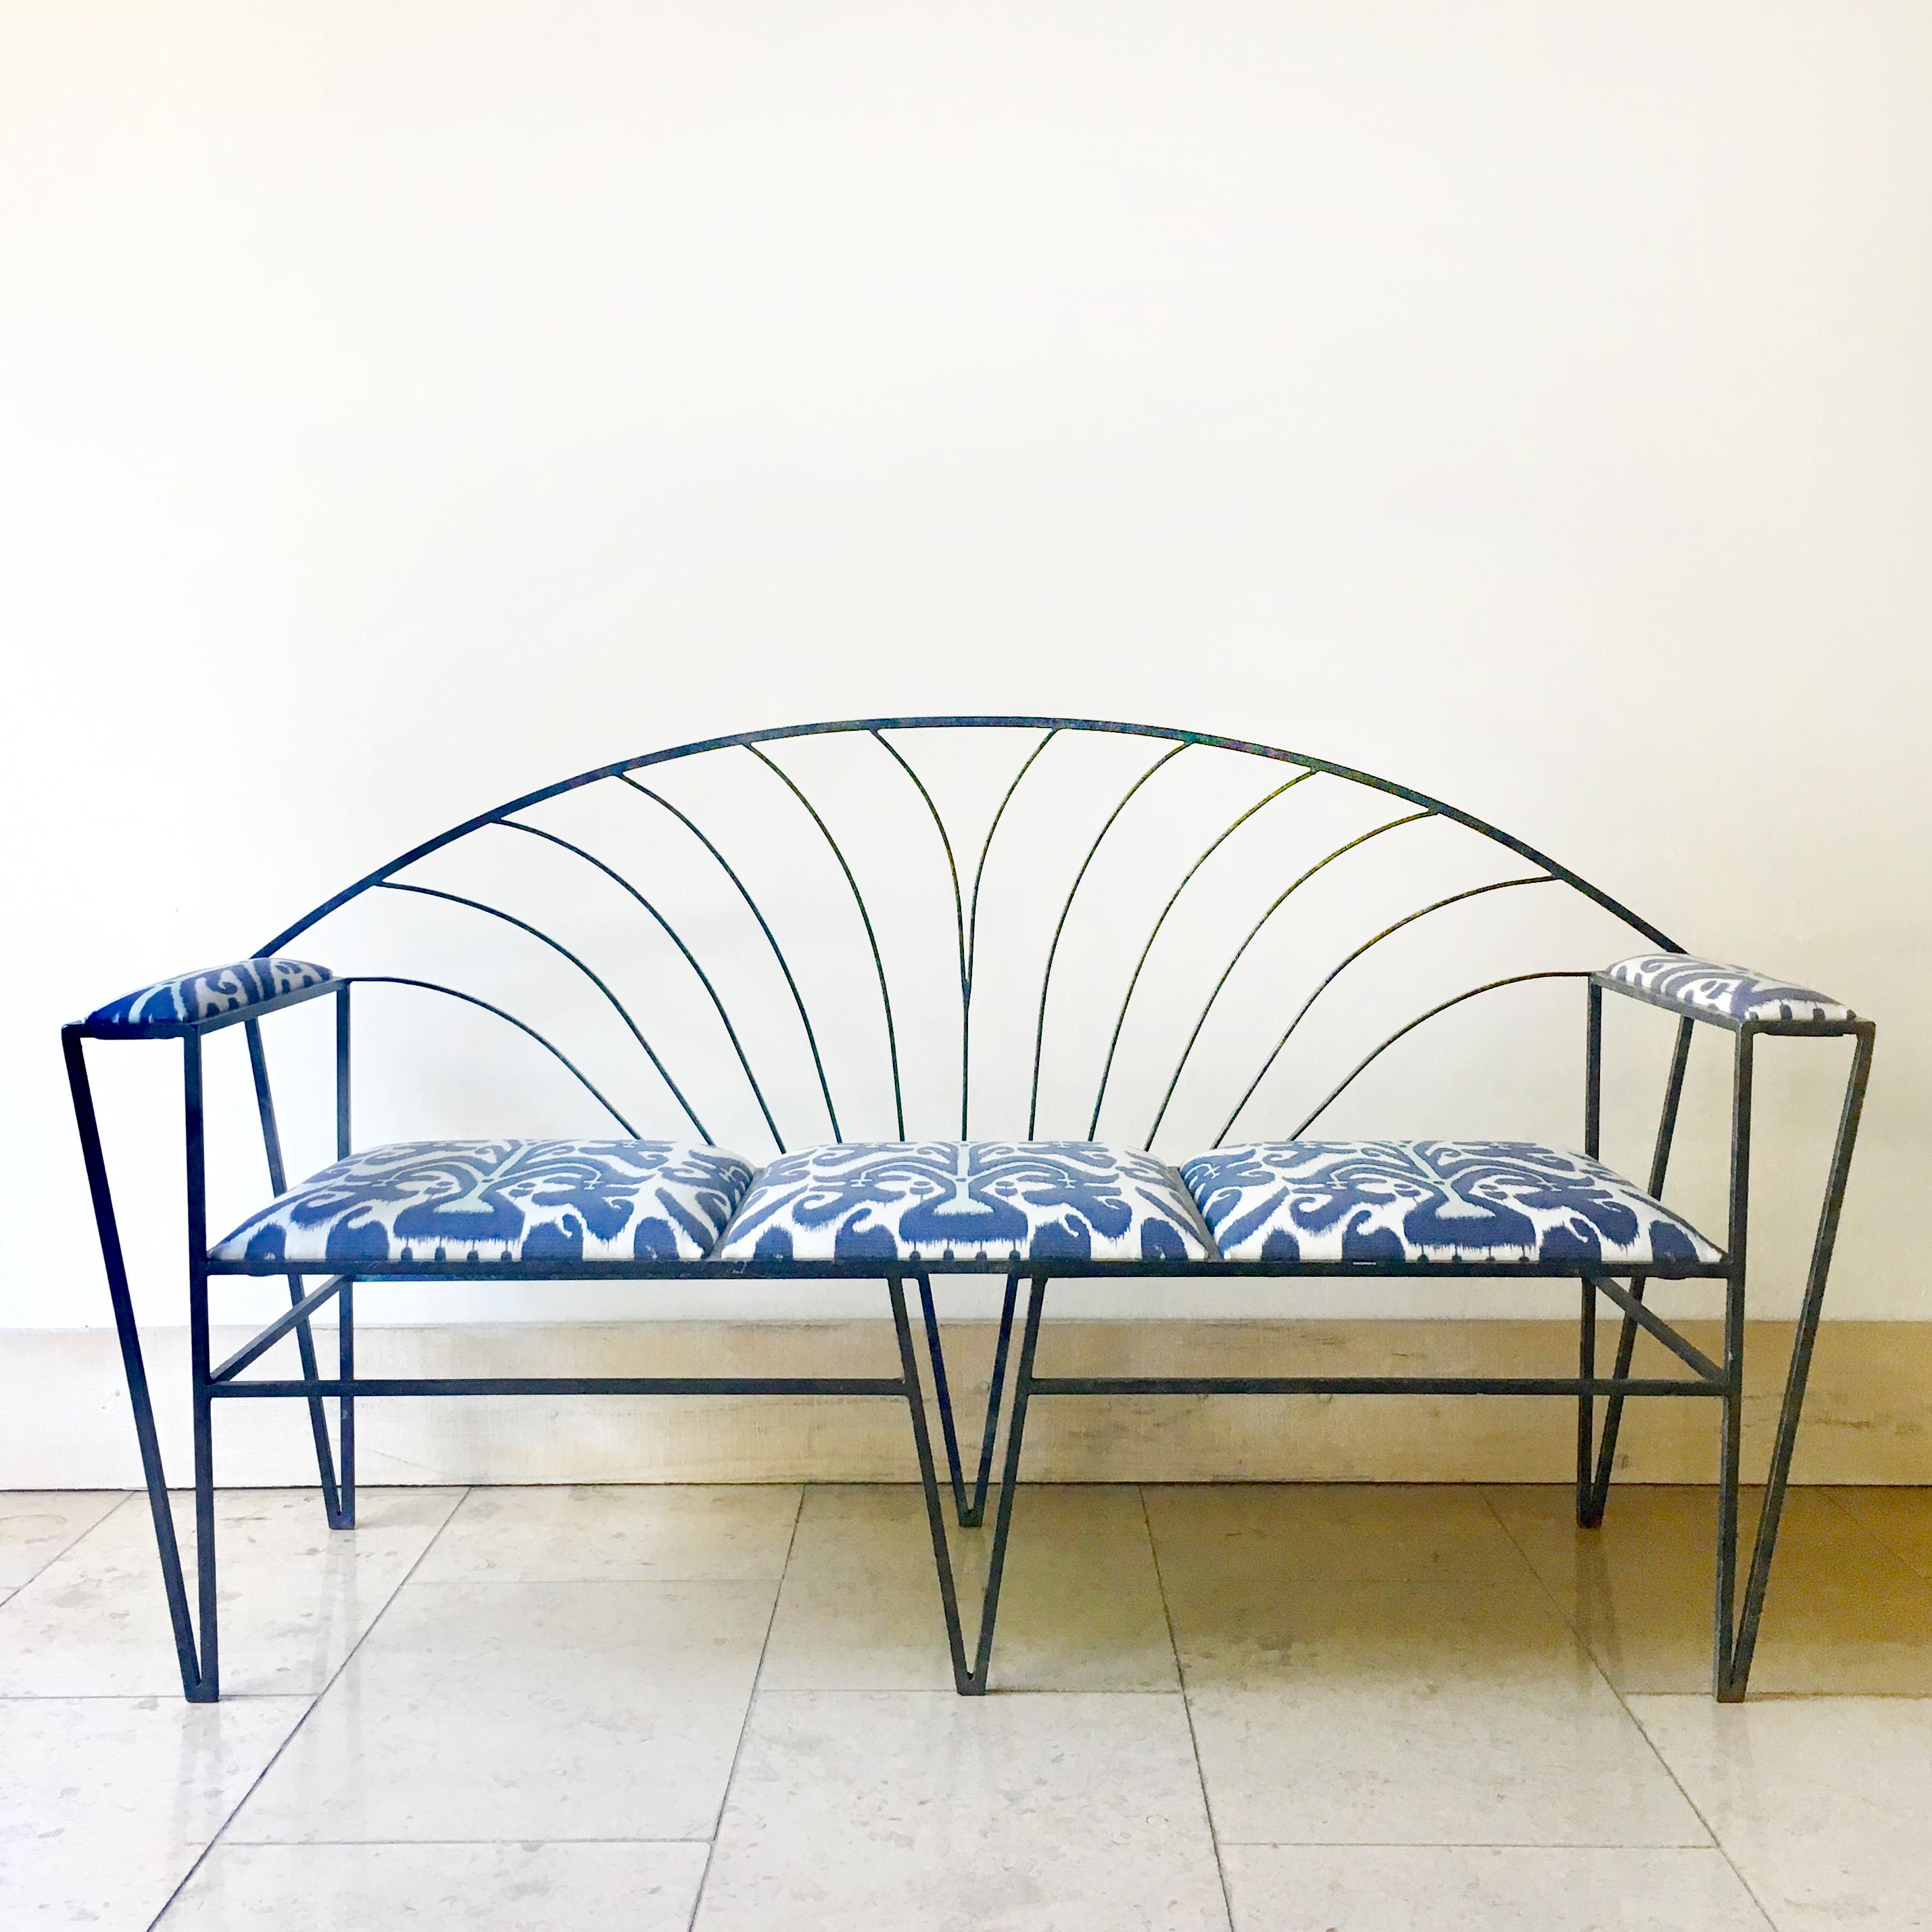 Sculptural French Art Deco wrought iron bench 1930s with removable outdoor Ikat upholstered seat pads hand finished in a rich turquoise patination.